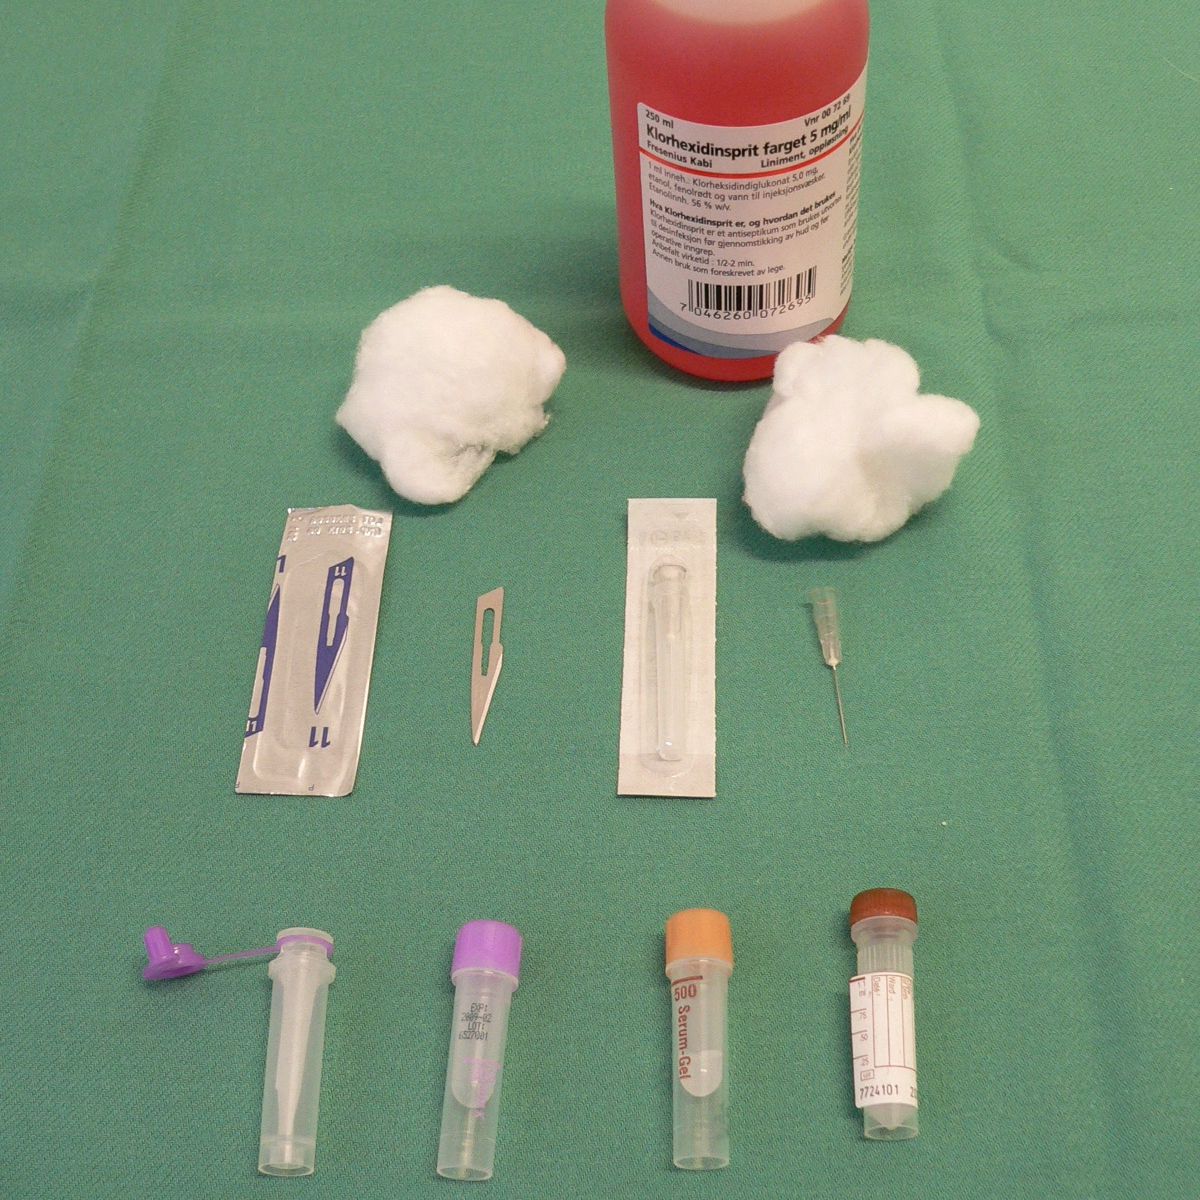 To perform this technique, a scalpel blade is used to shave the fur, disinfectant to clean the puncture site, a syringe needle to make a hole in the vein and cotton wool to apply pressure and stop bleeding.